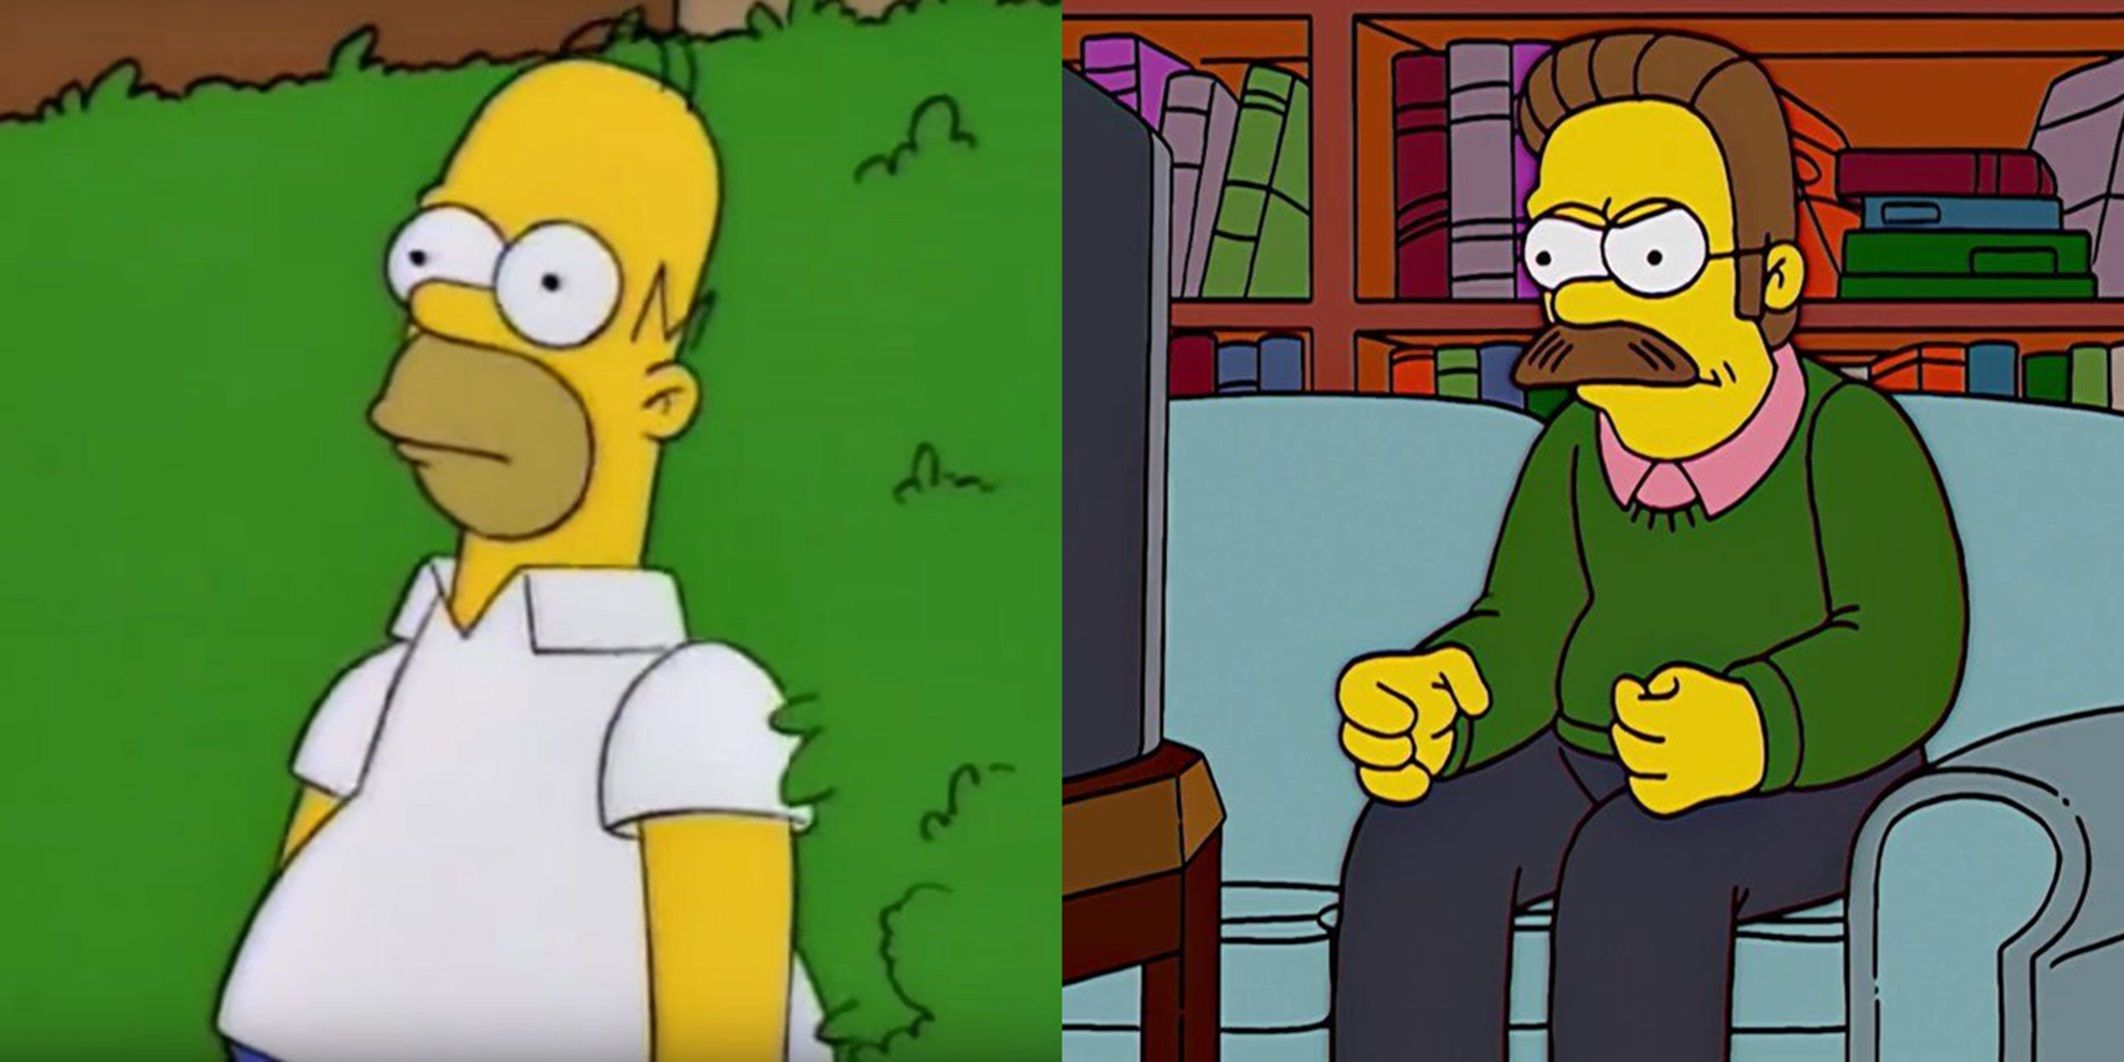 Split_image_of_Homer_in_a_hedge_and_Flanders_watching_TV_in_The_Simpsons